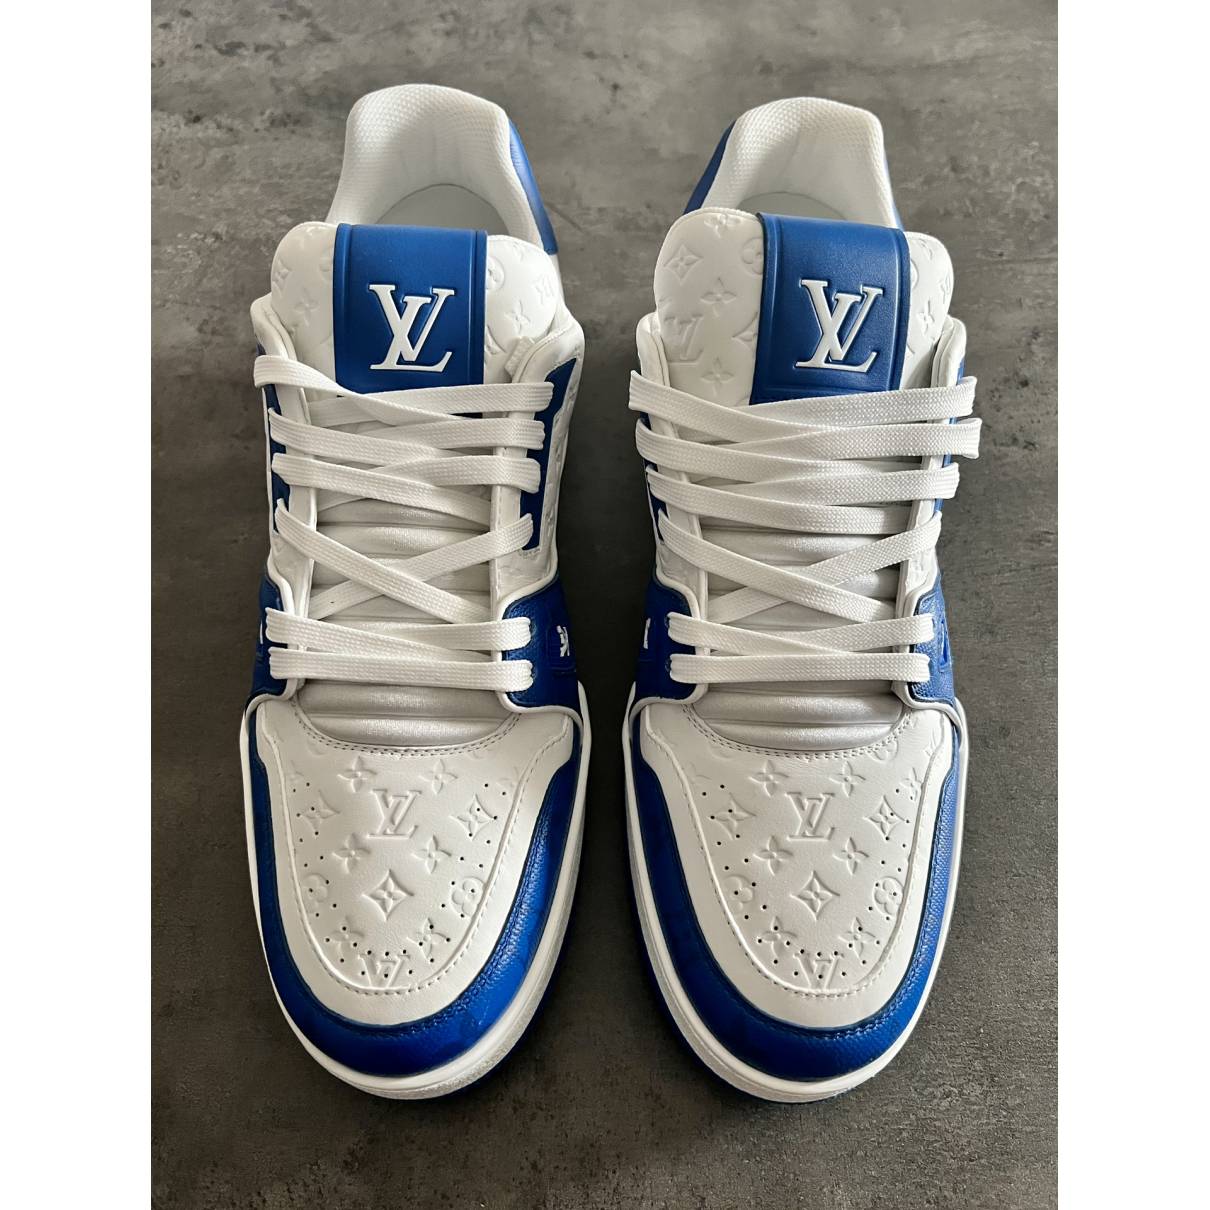 Lv trainer leather low trainers Louis Vuitton Blue size 5 UK in Leather -  34188365